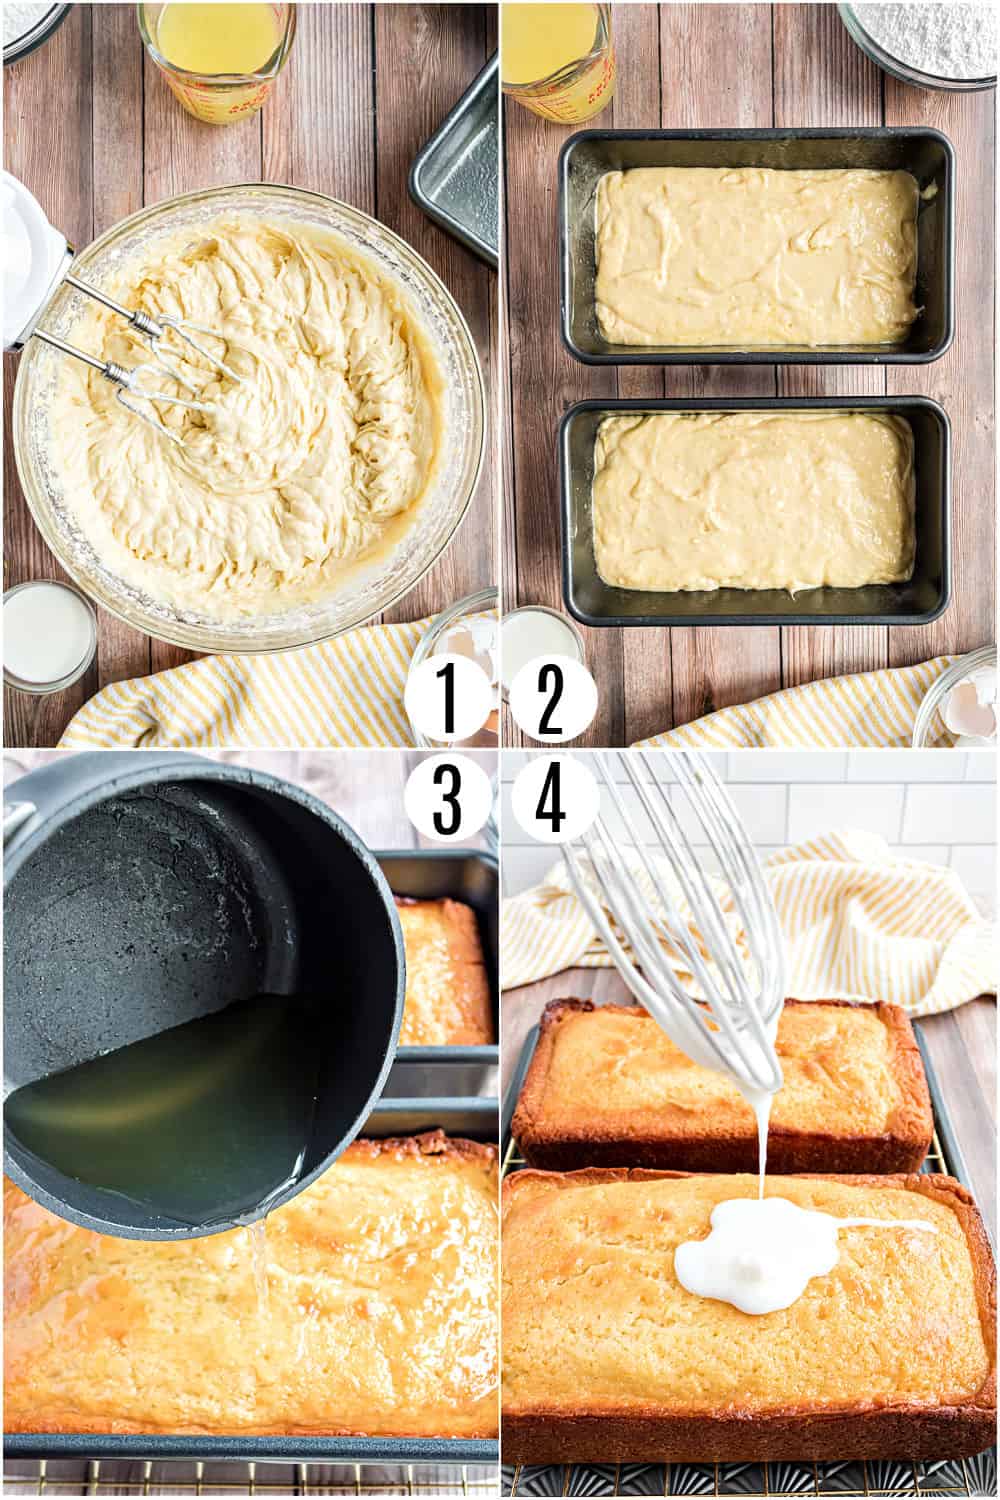 Step by step photos showing how to make lemon loaf.